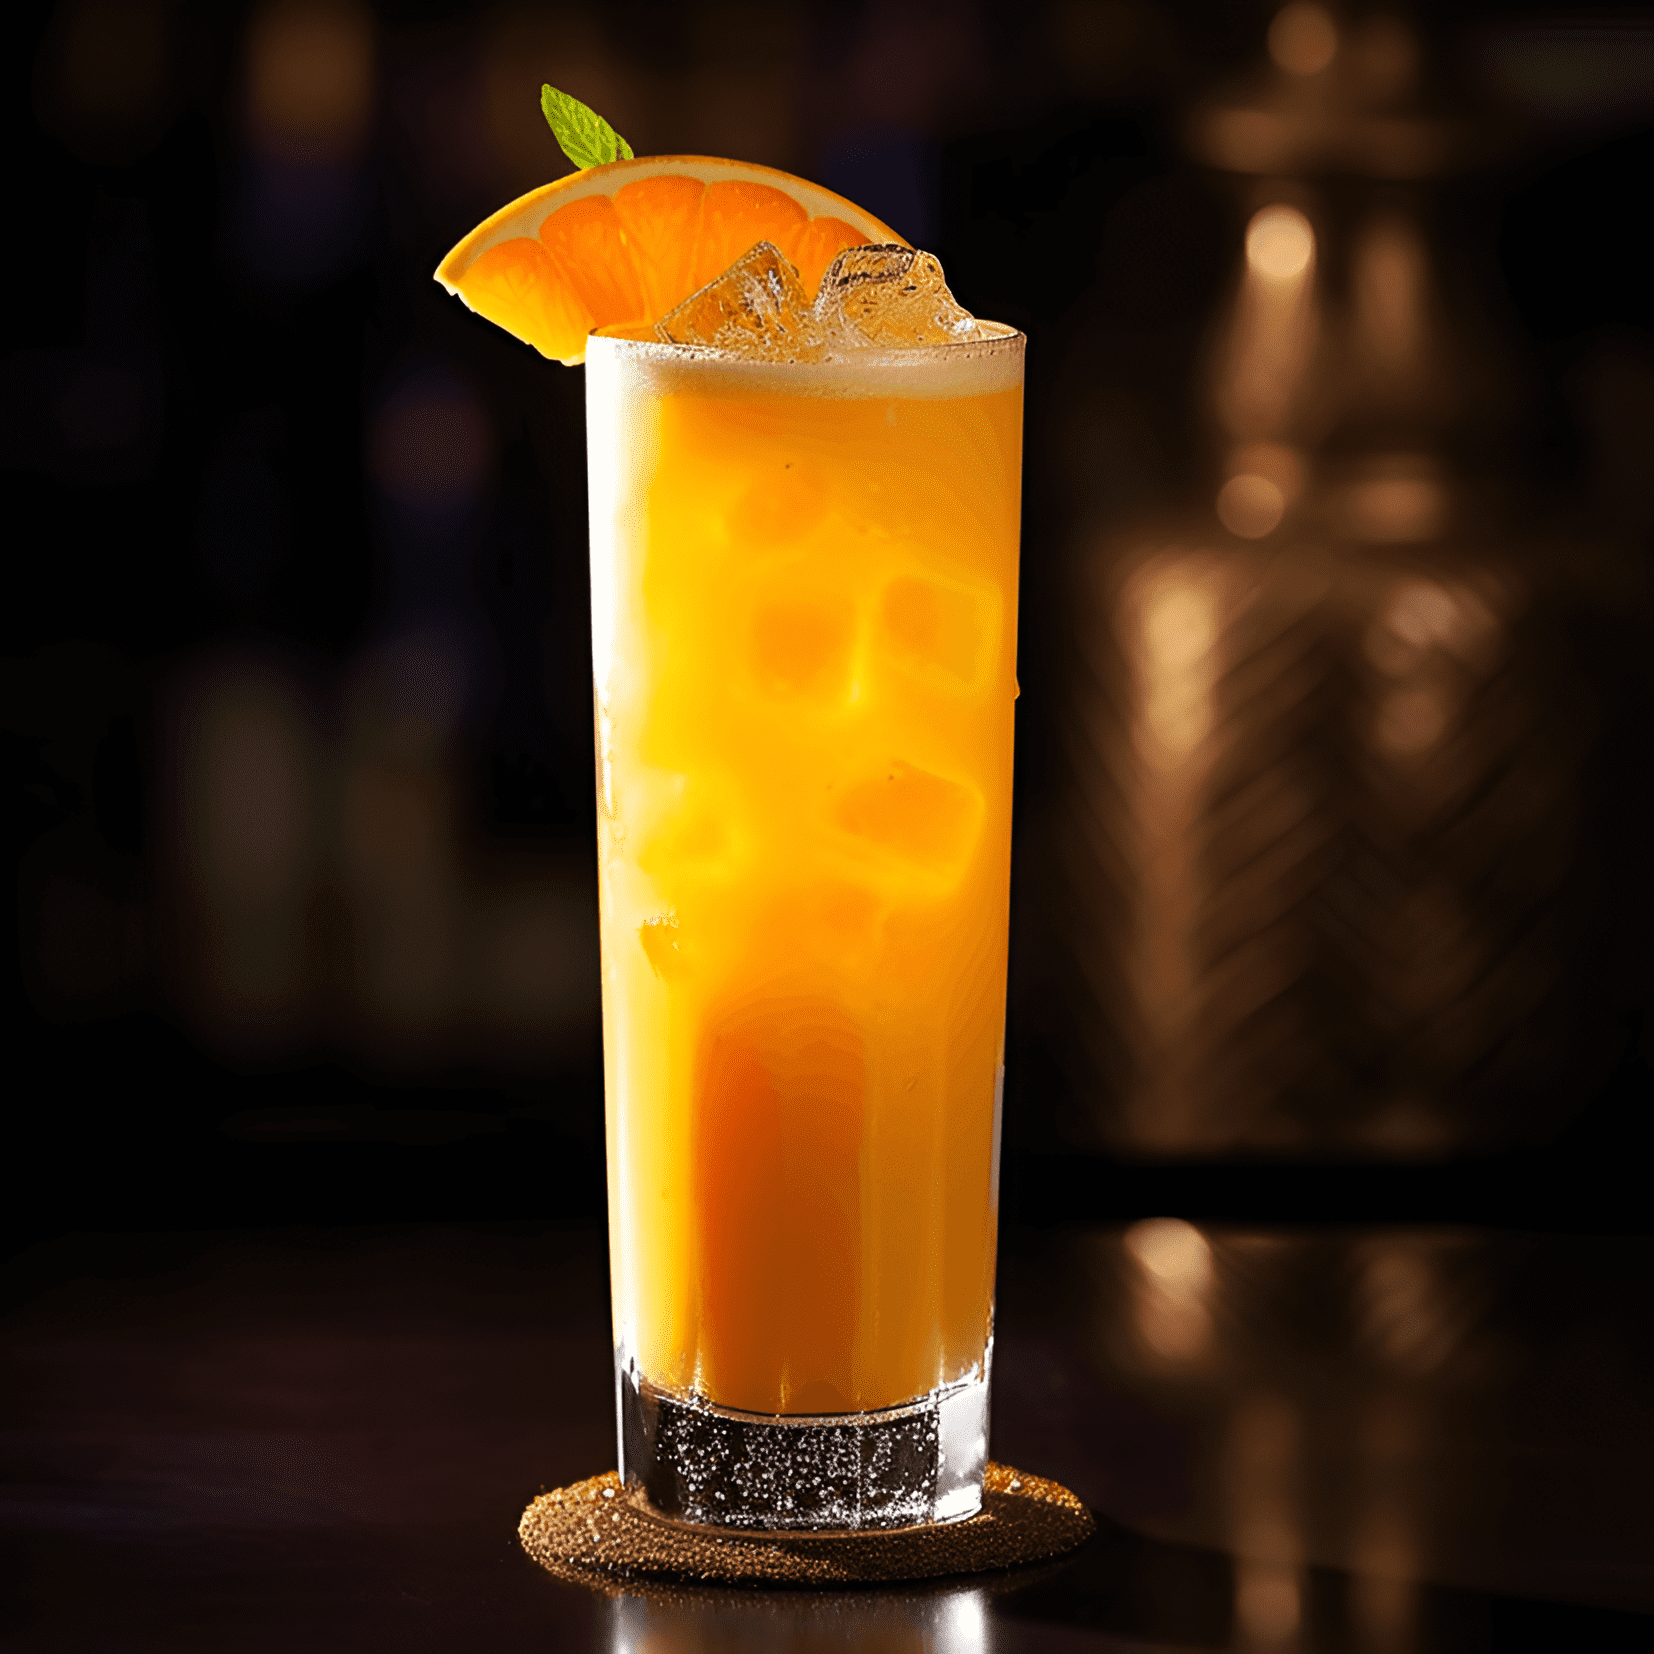 Indian Summer Cocktail Recipe - The Indian Summer cocktail is a delightful blend of sweet, sour, and spicy flavors. The sweetness of the mango and the tartness of the lime juice create a perfect balance, while the ginger and chili add a subtle heat that lingers on the palate. The overall taste is refreshing, fruity, and exotic.